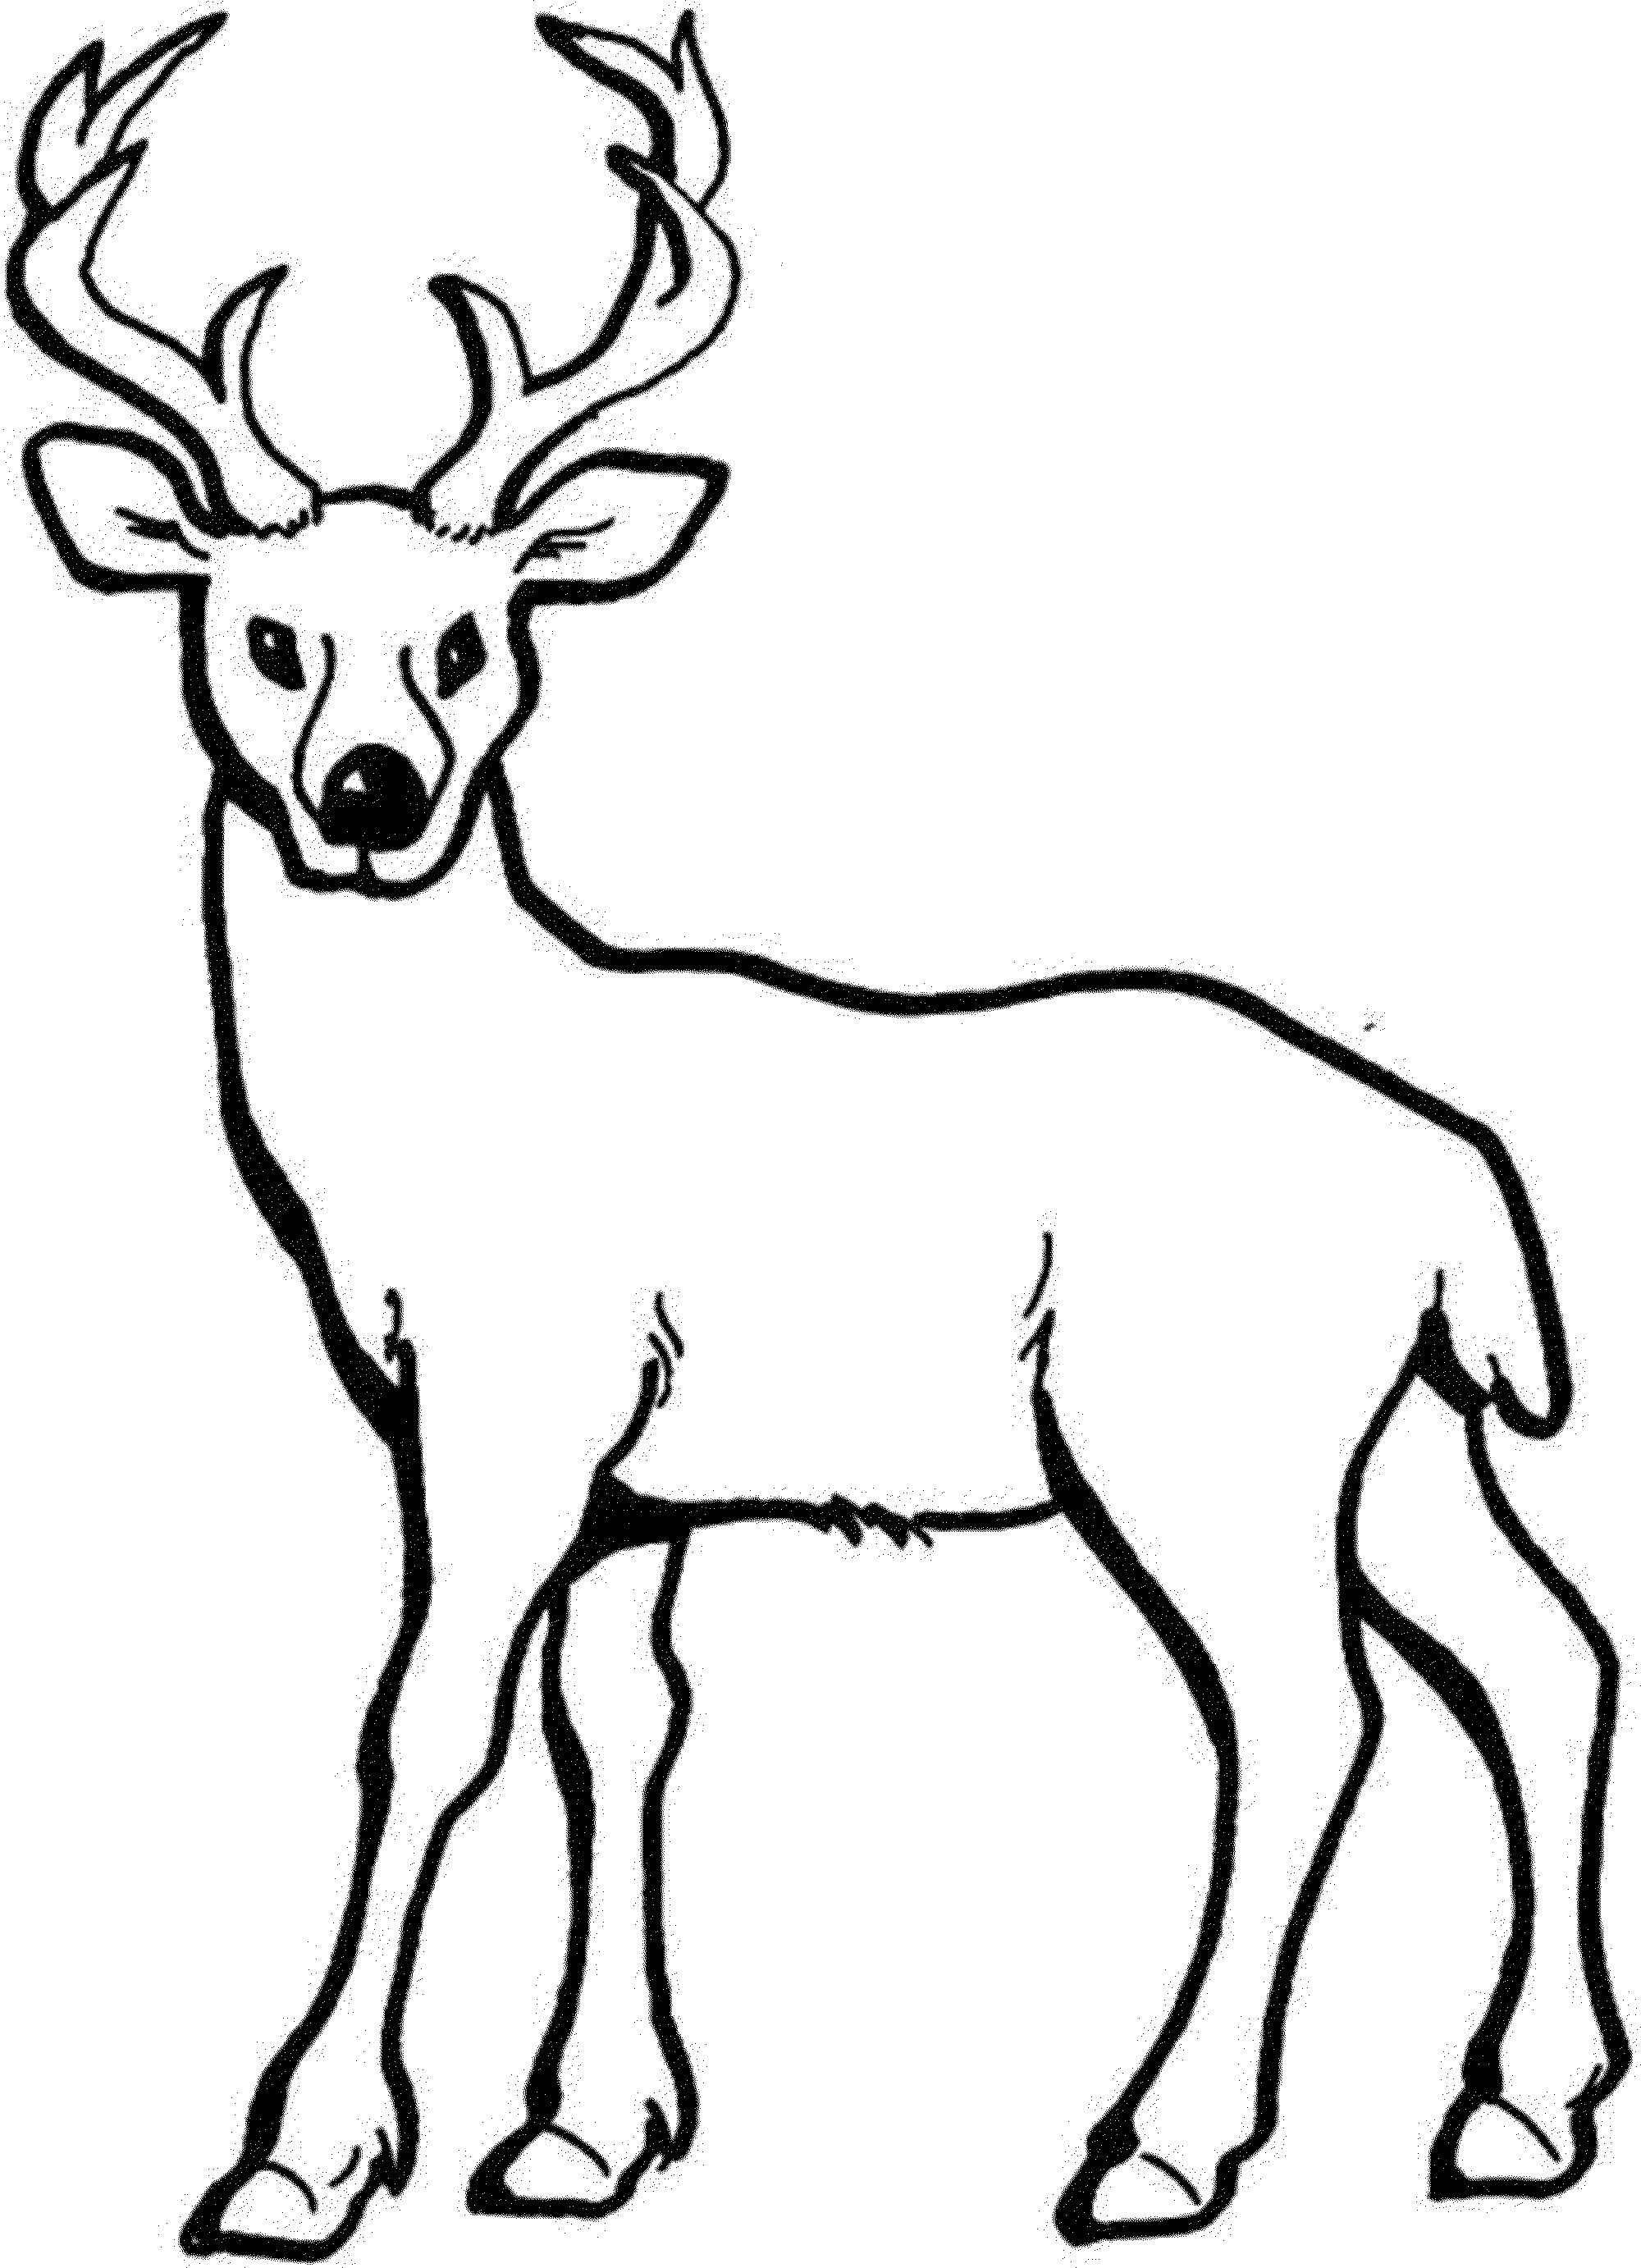 9 Pics of Deer In Forest Coloring Pages - Deer Coloring Pages ...